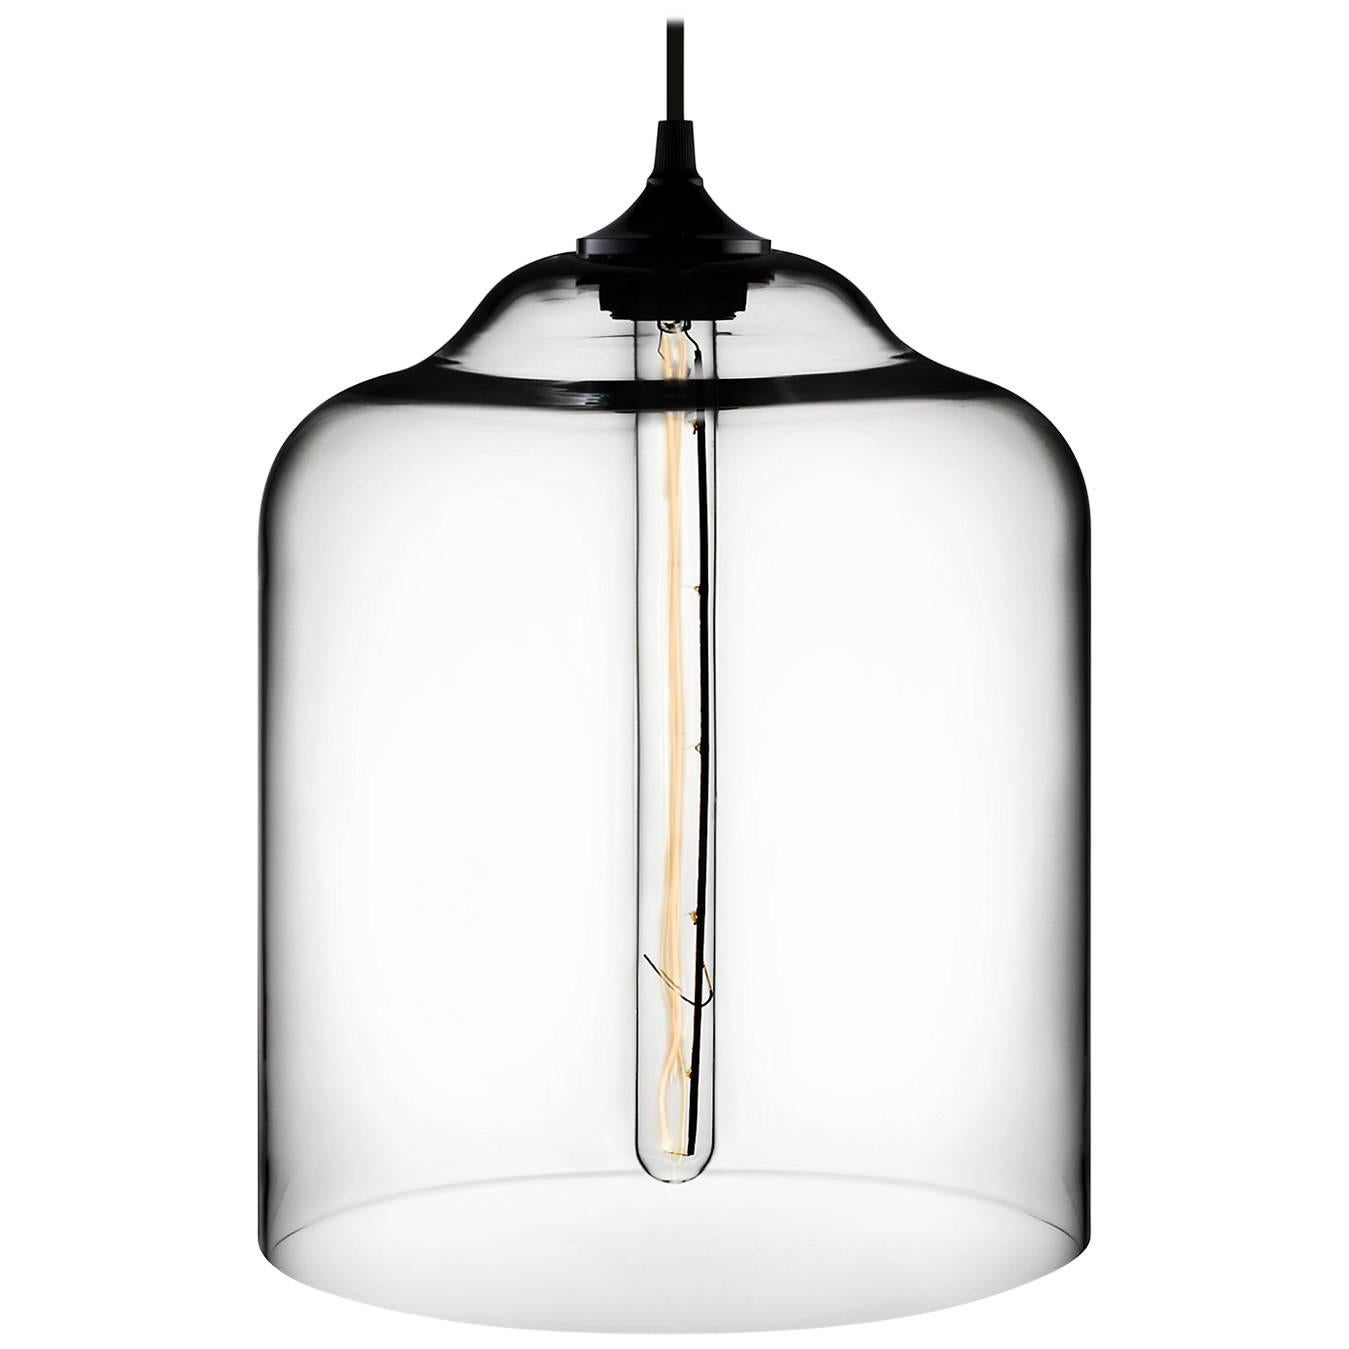 Bell Jar Crystal Handblown Modern Glass Pendant Light, Made in the USA For Sale